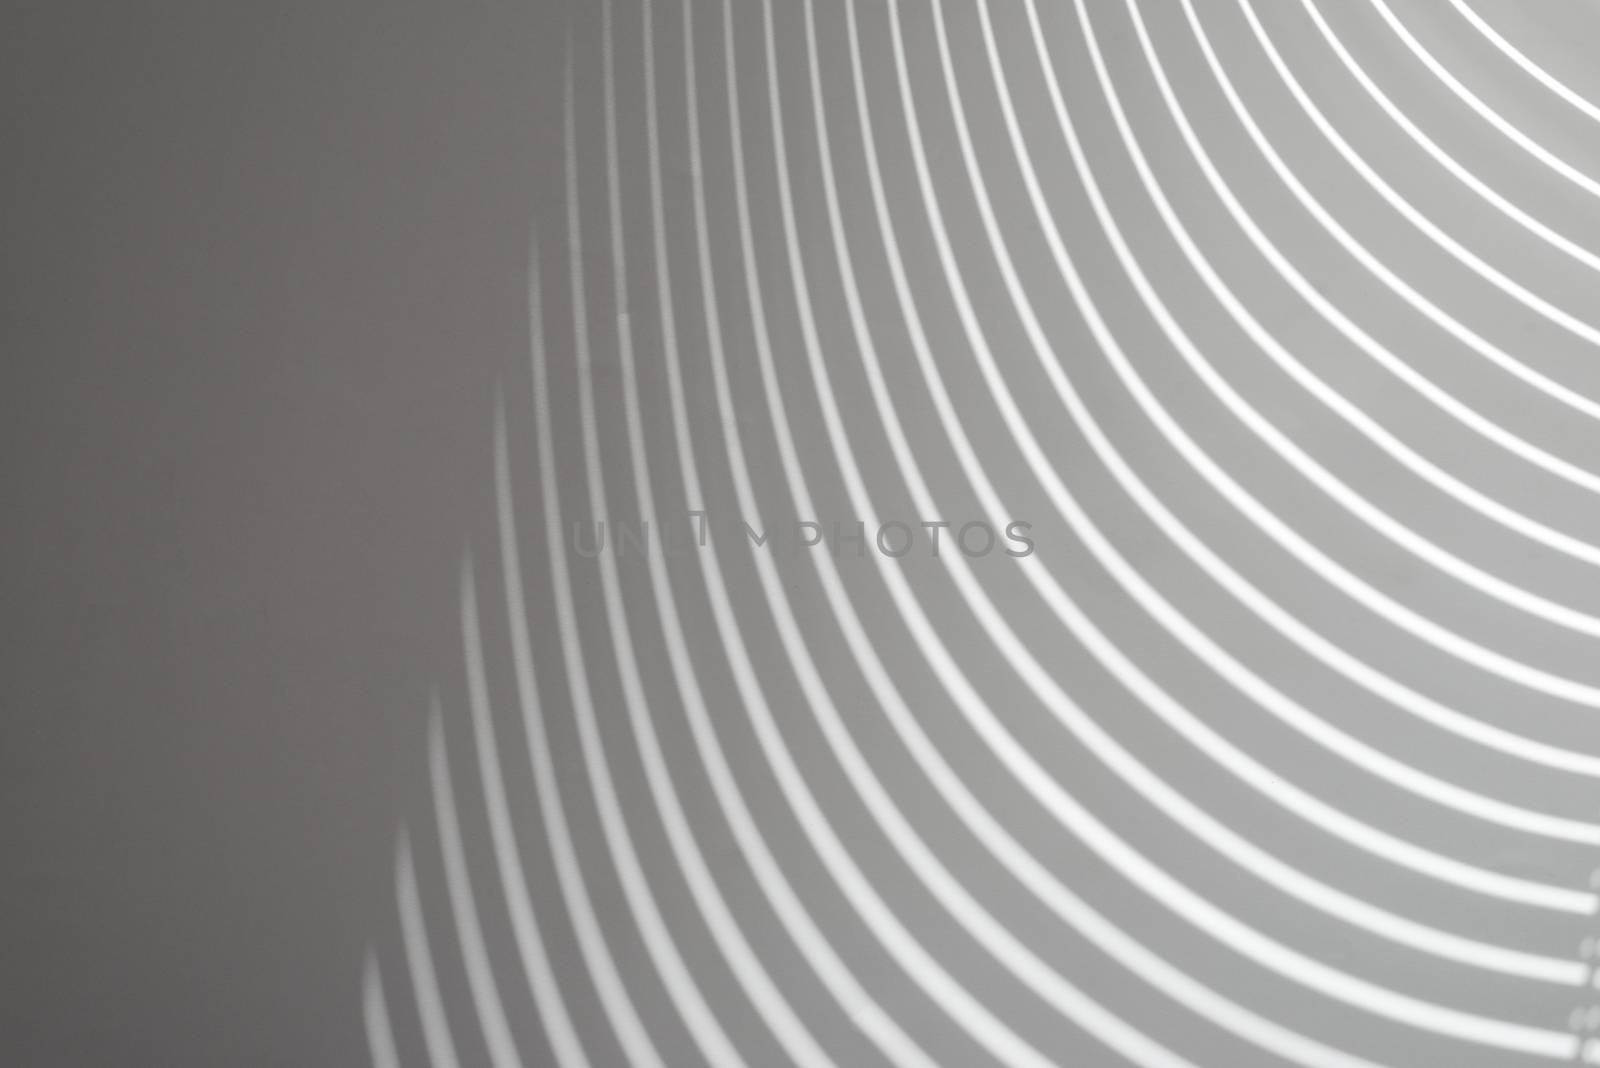 Blind shadow on white background by DNKSTUDIO